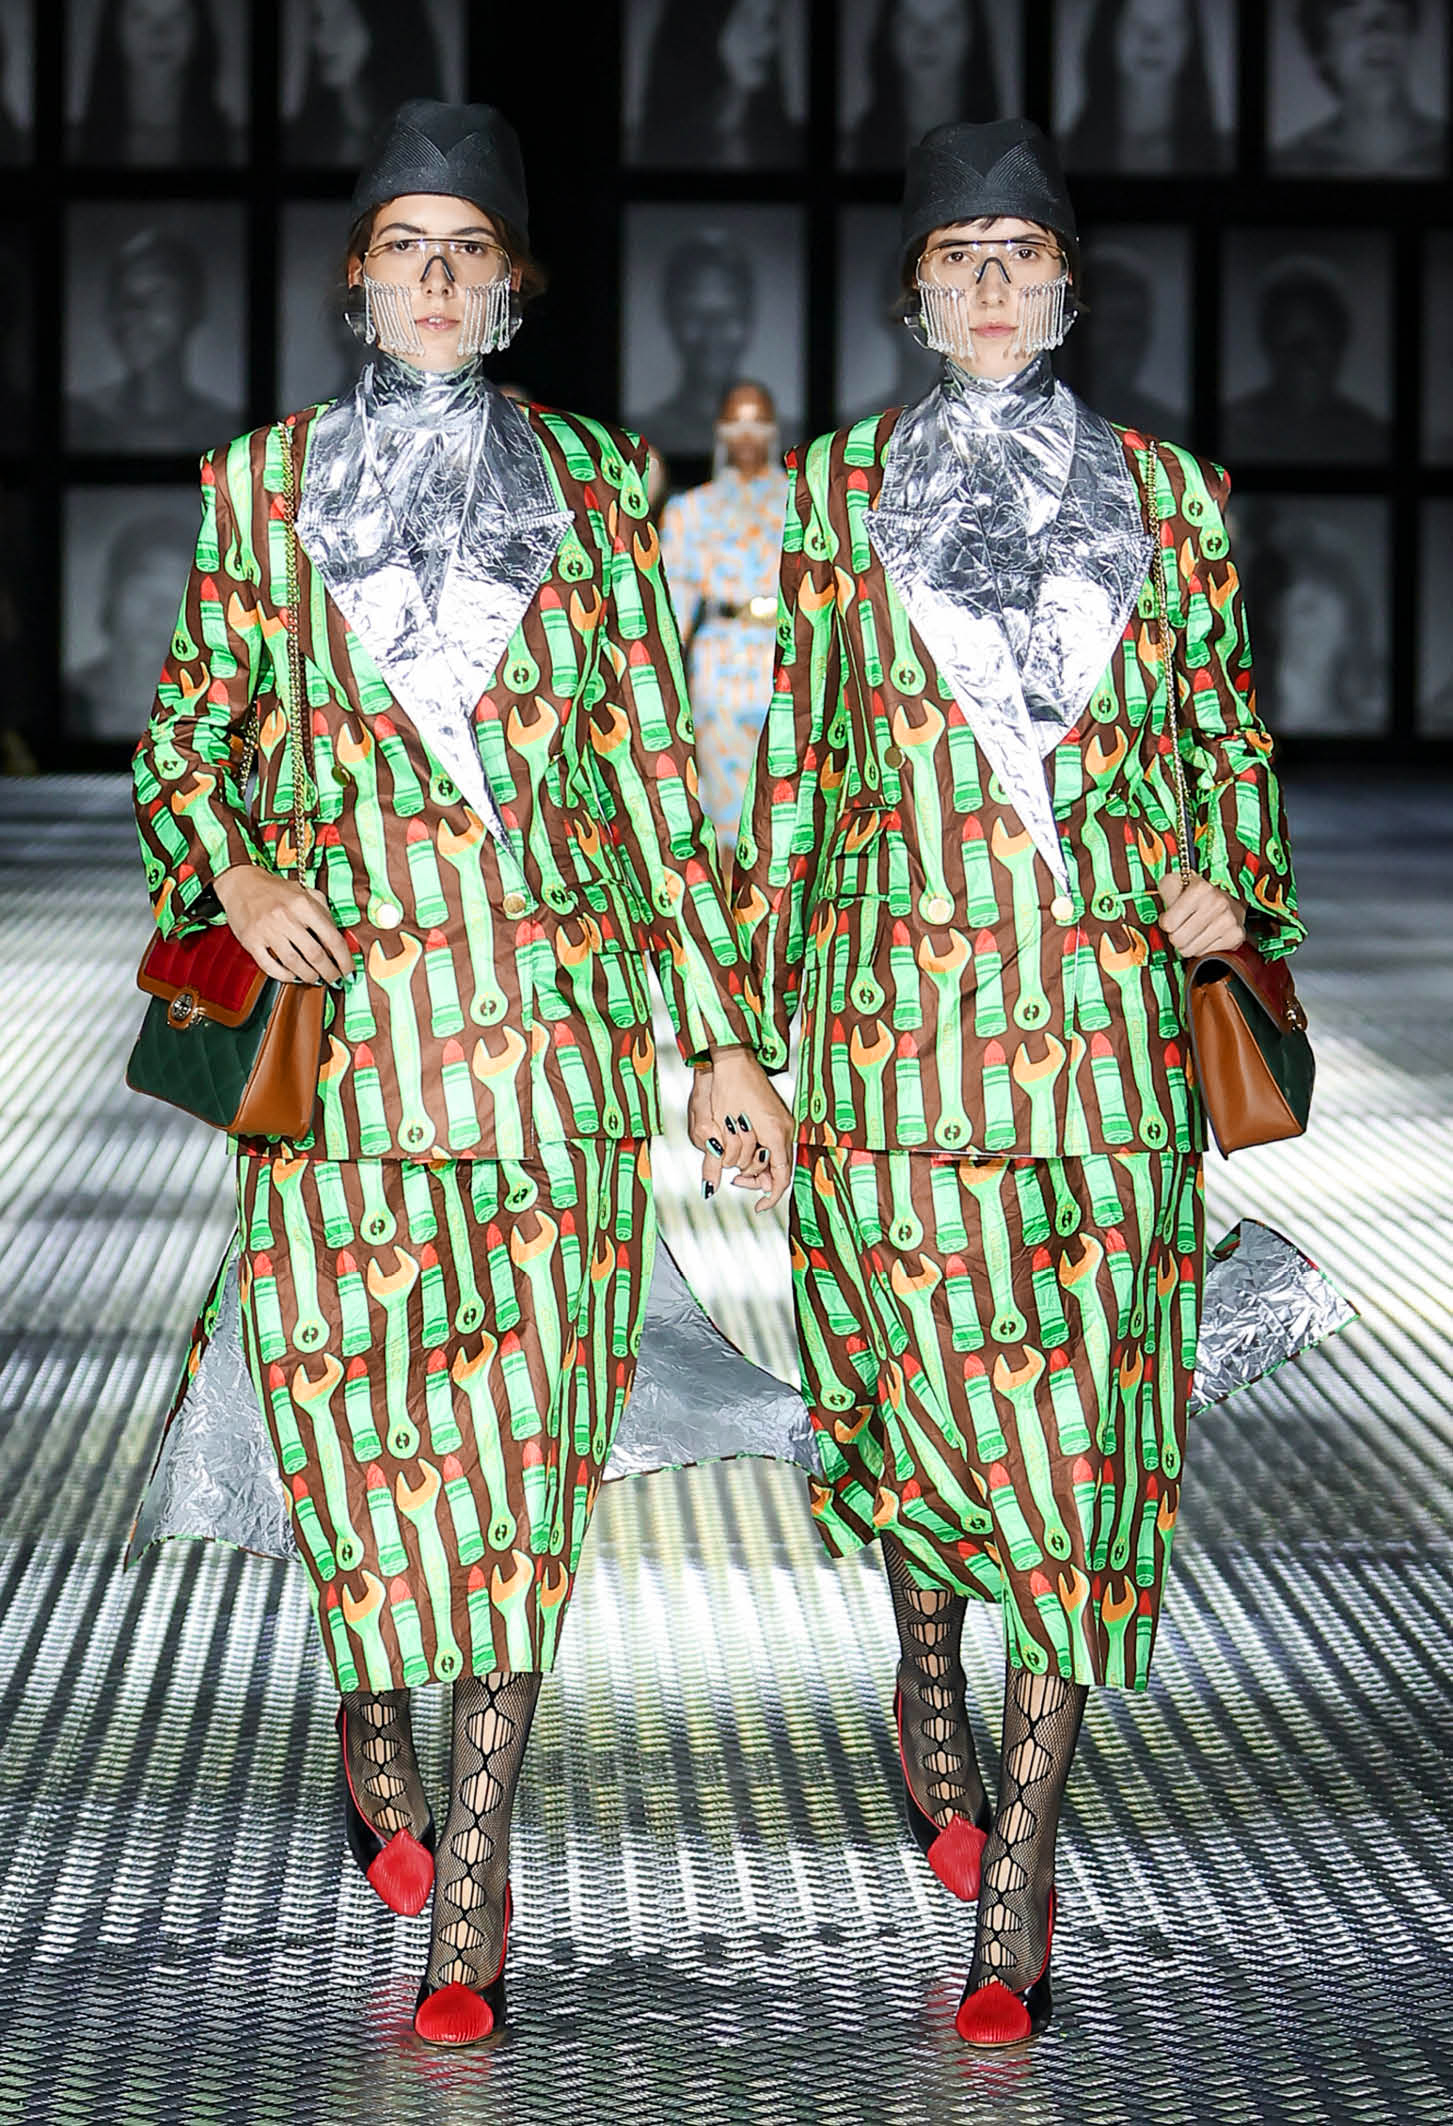 Analysis: Out of fashion: Gucci faces daunting task to replace top